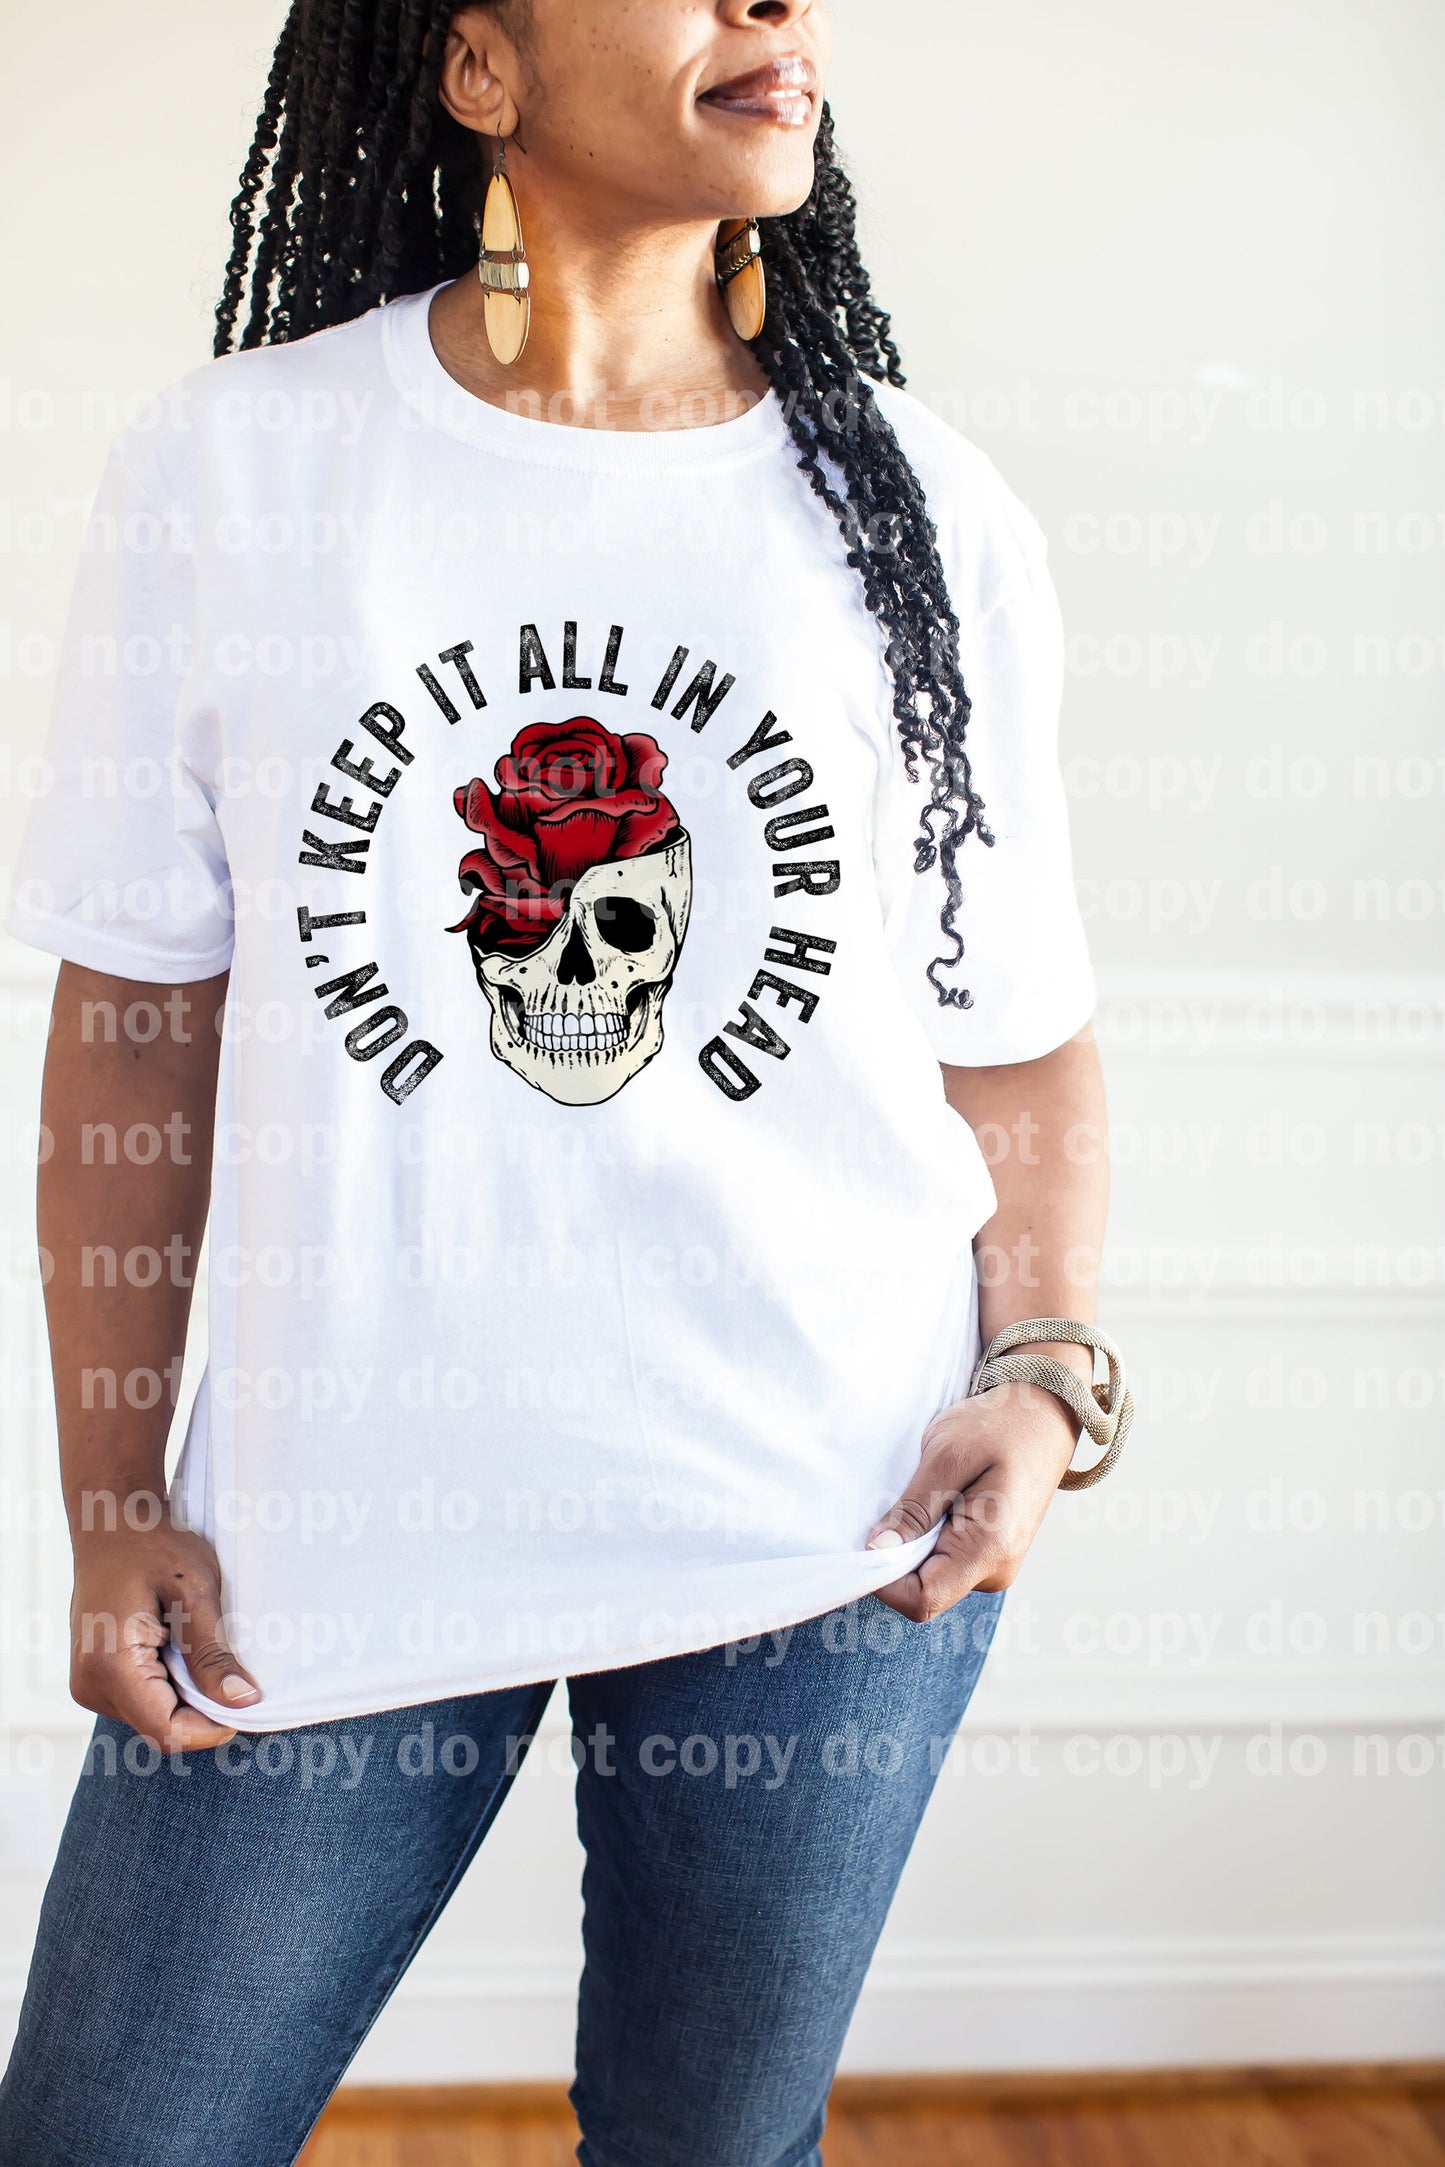 Don't Keep It All In Your Head Dream Print or Sublimation Print